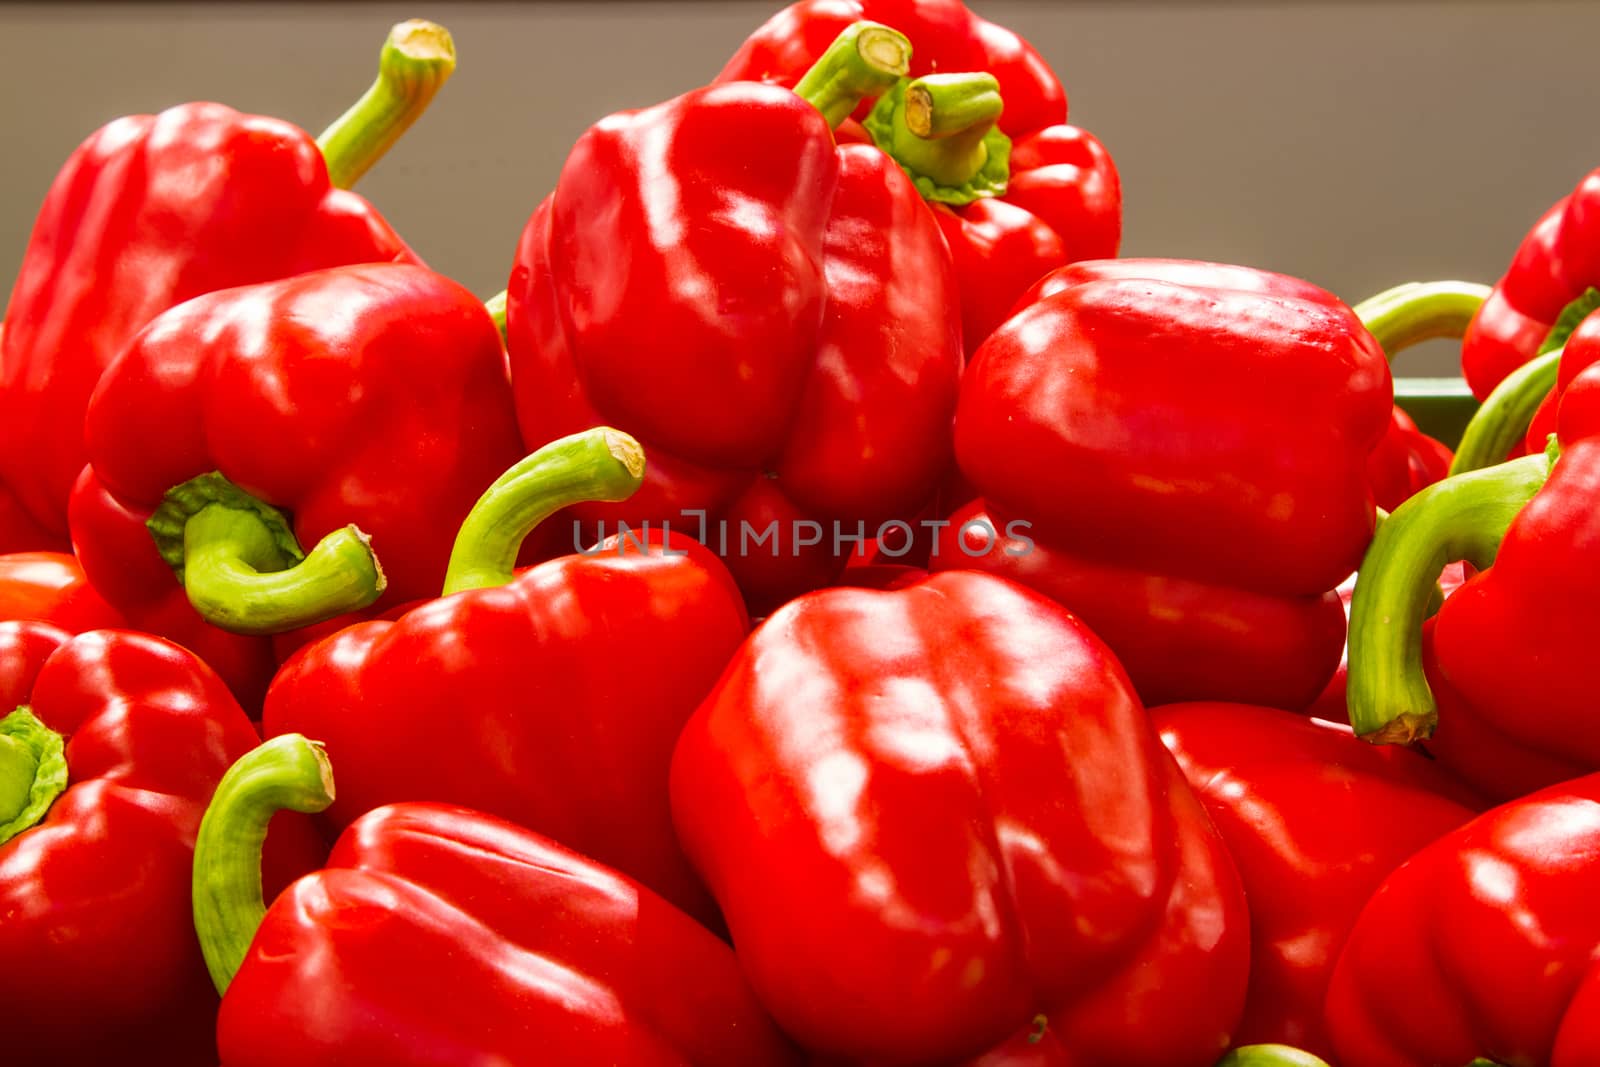 Ripe red bell peppers on the shelf in grocery store.